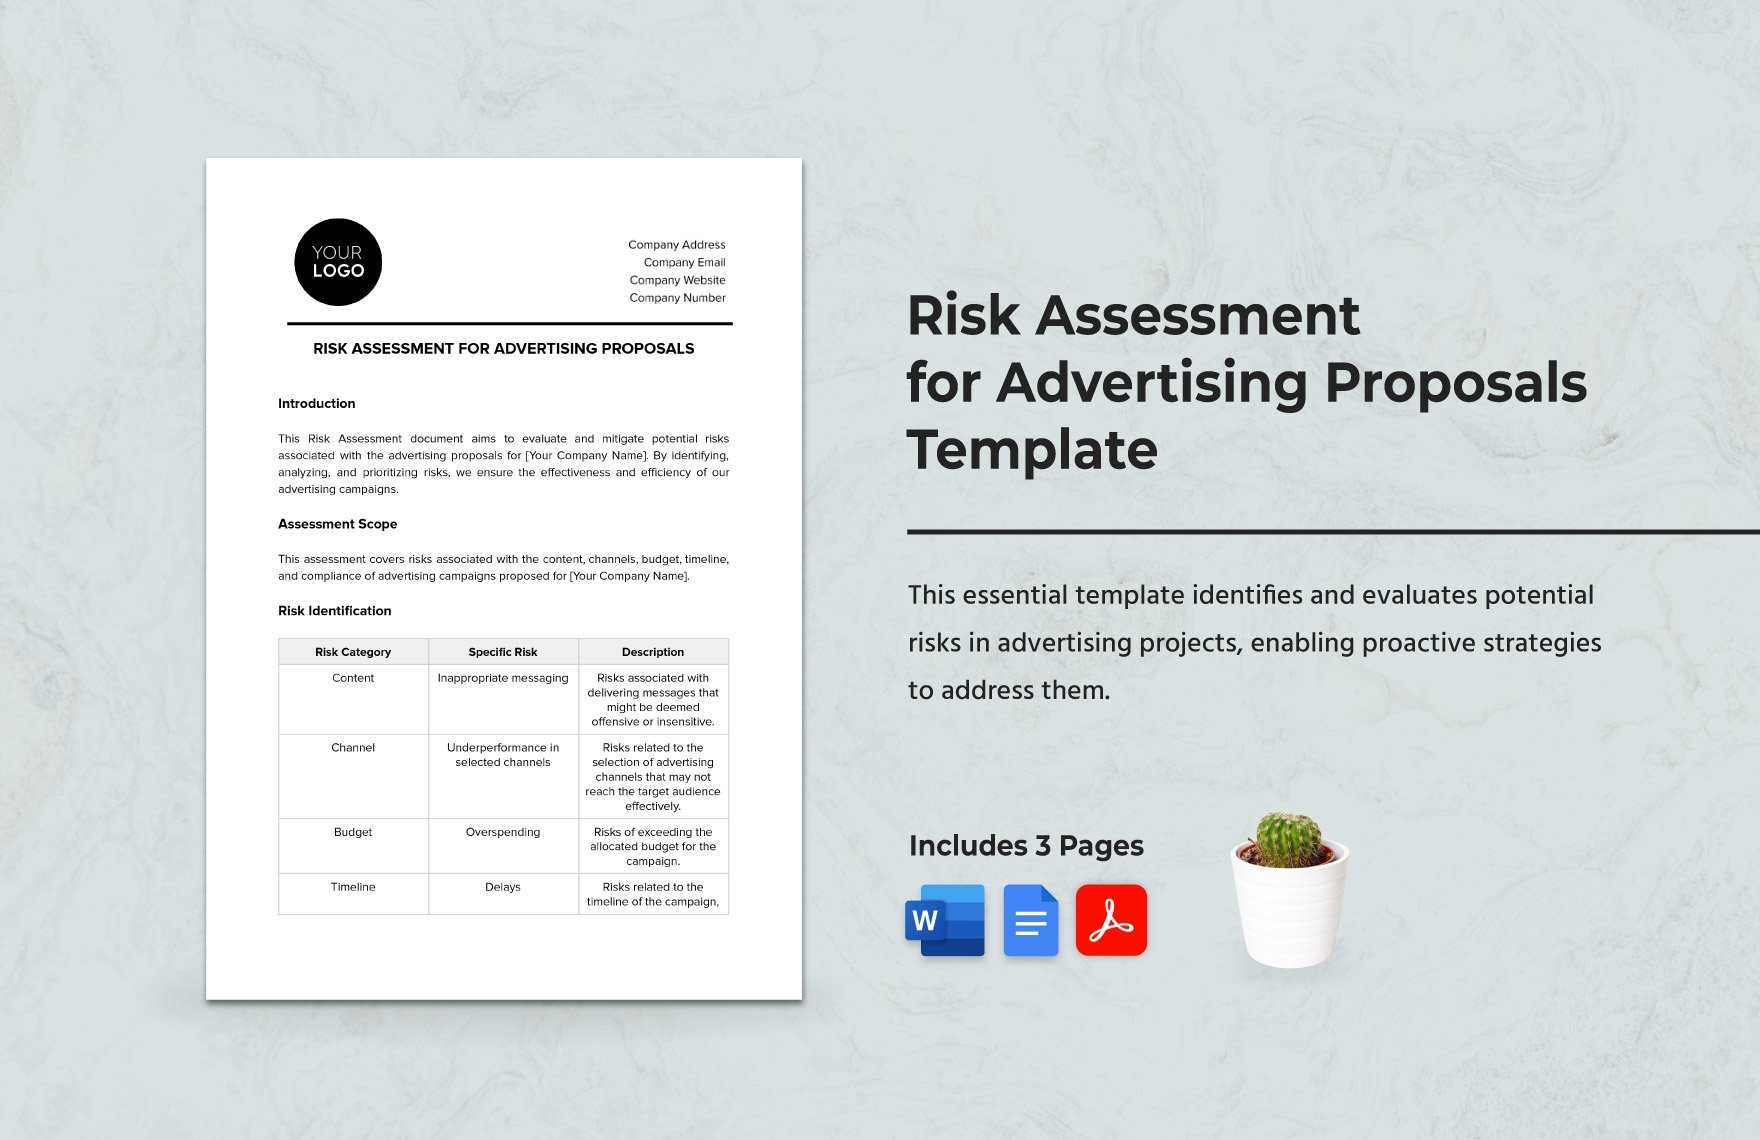 Risk Assessment for Advertising Proposals Template